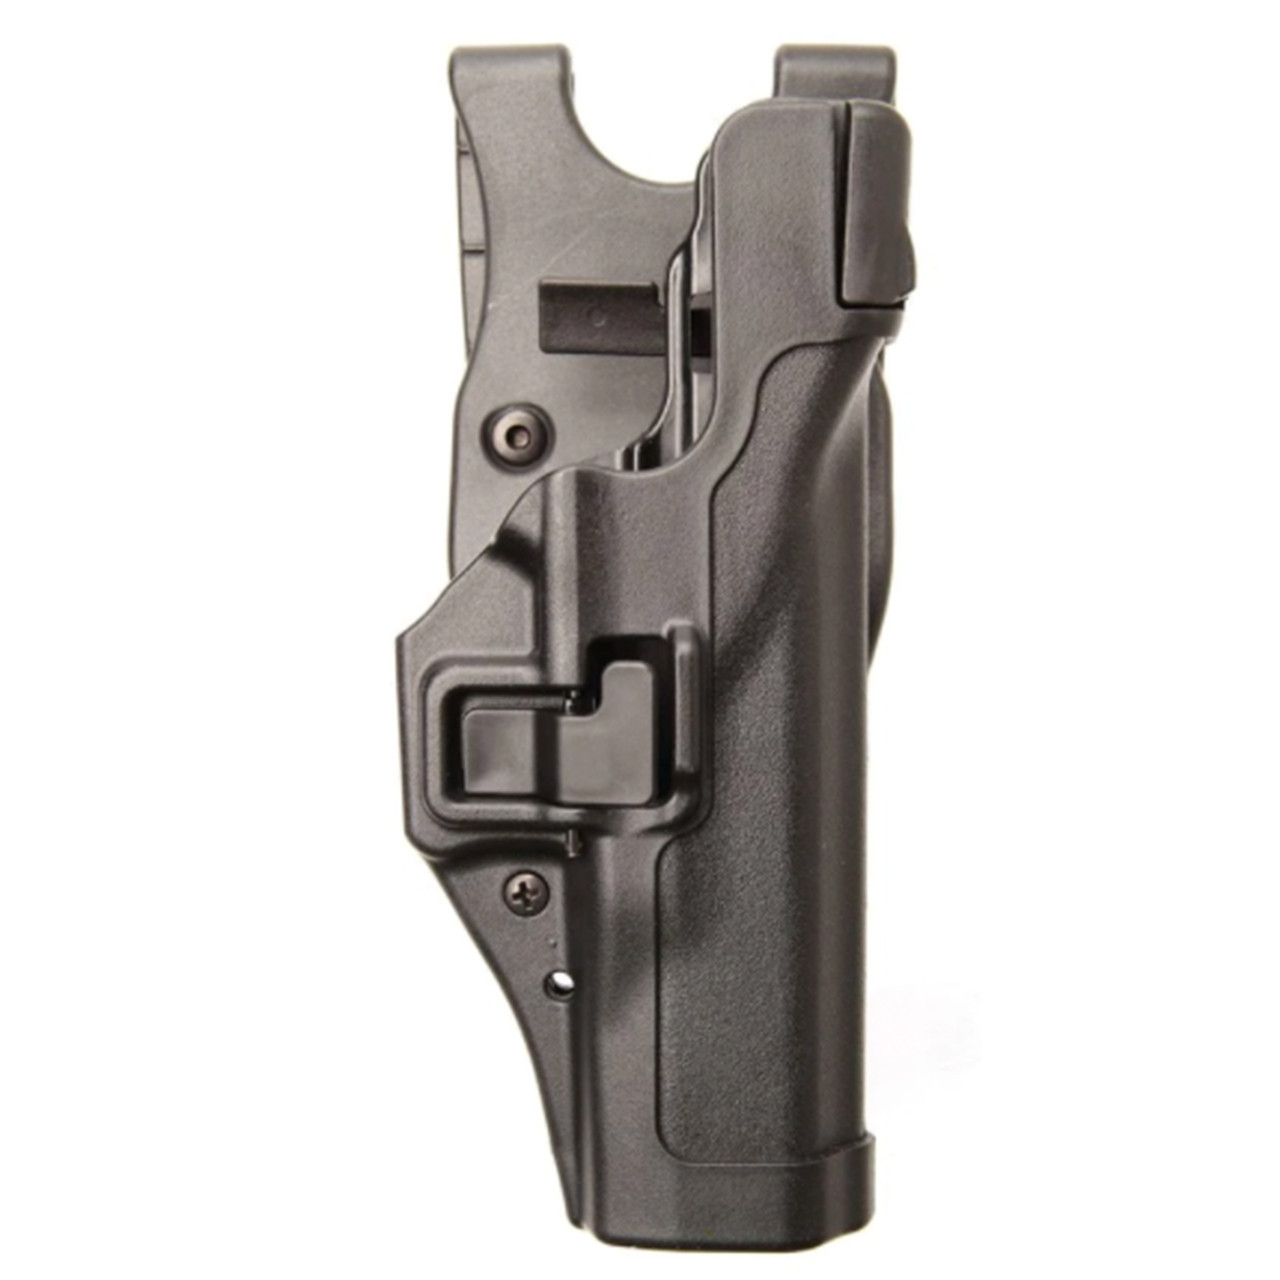 Buy Pro-3 Slim Line Duty Holster And More